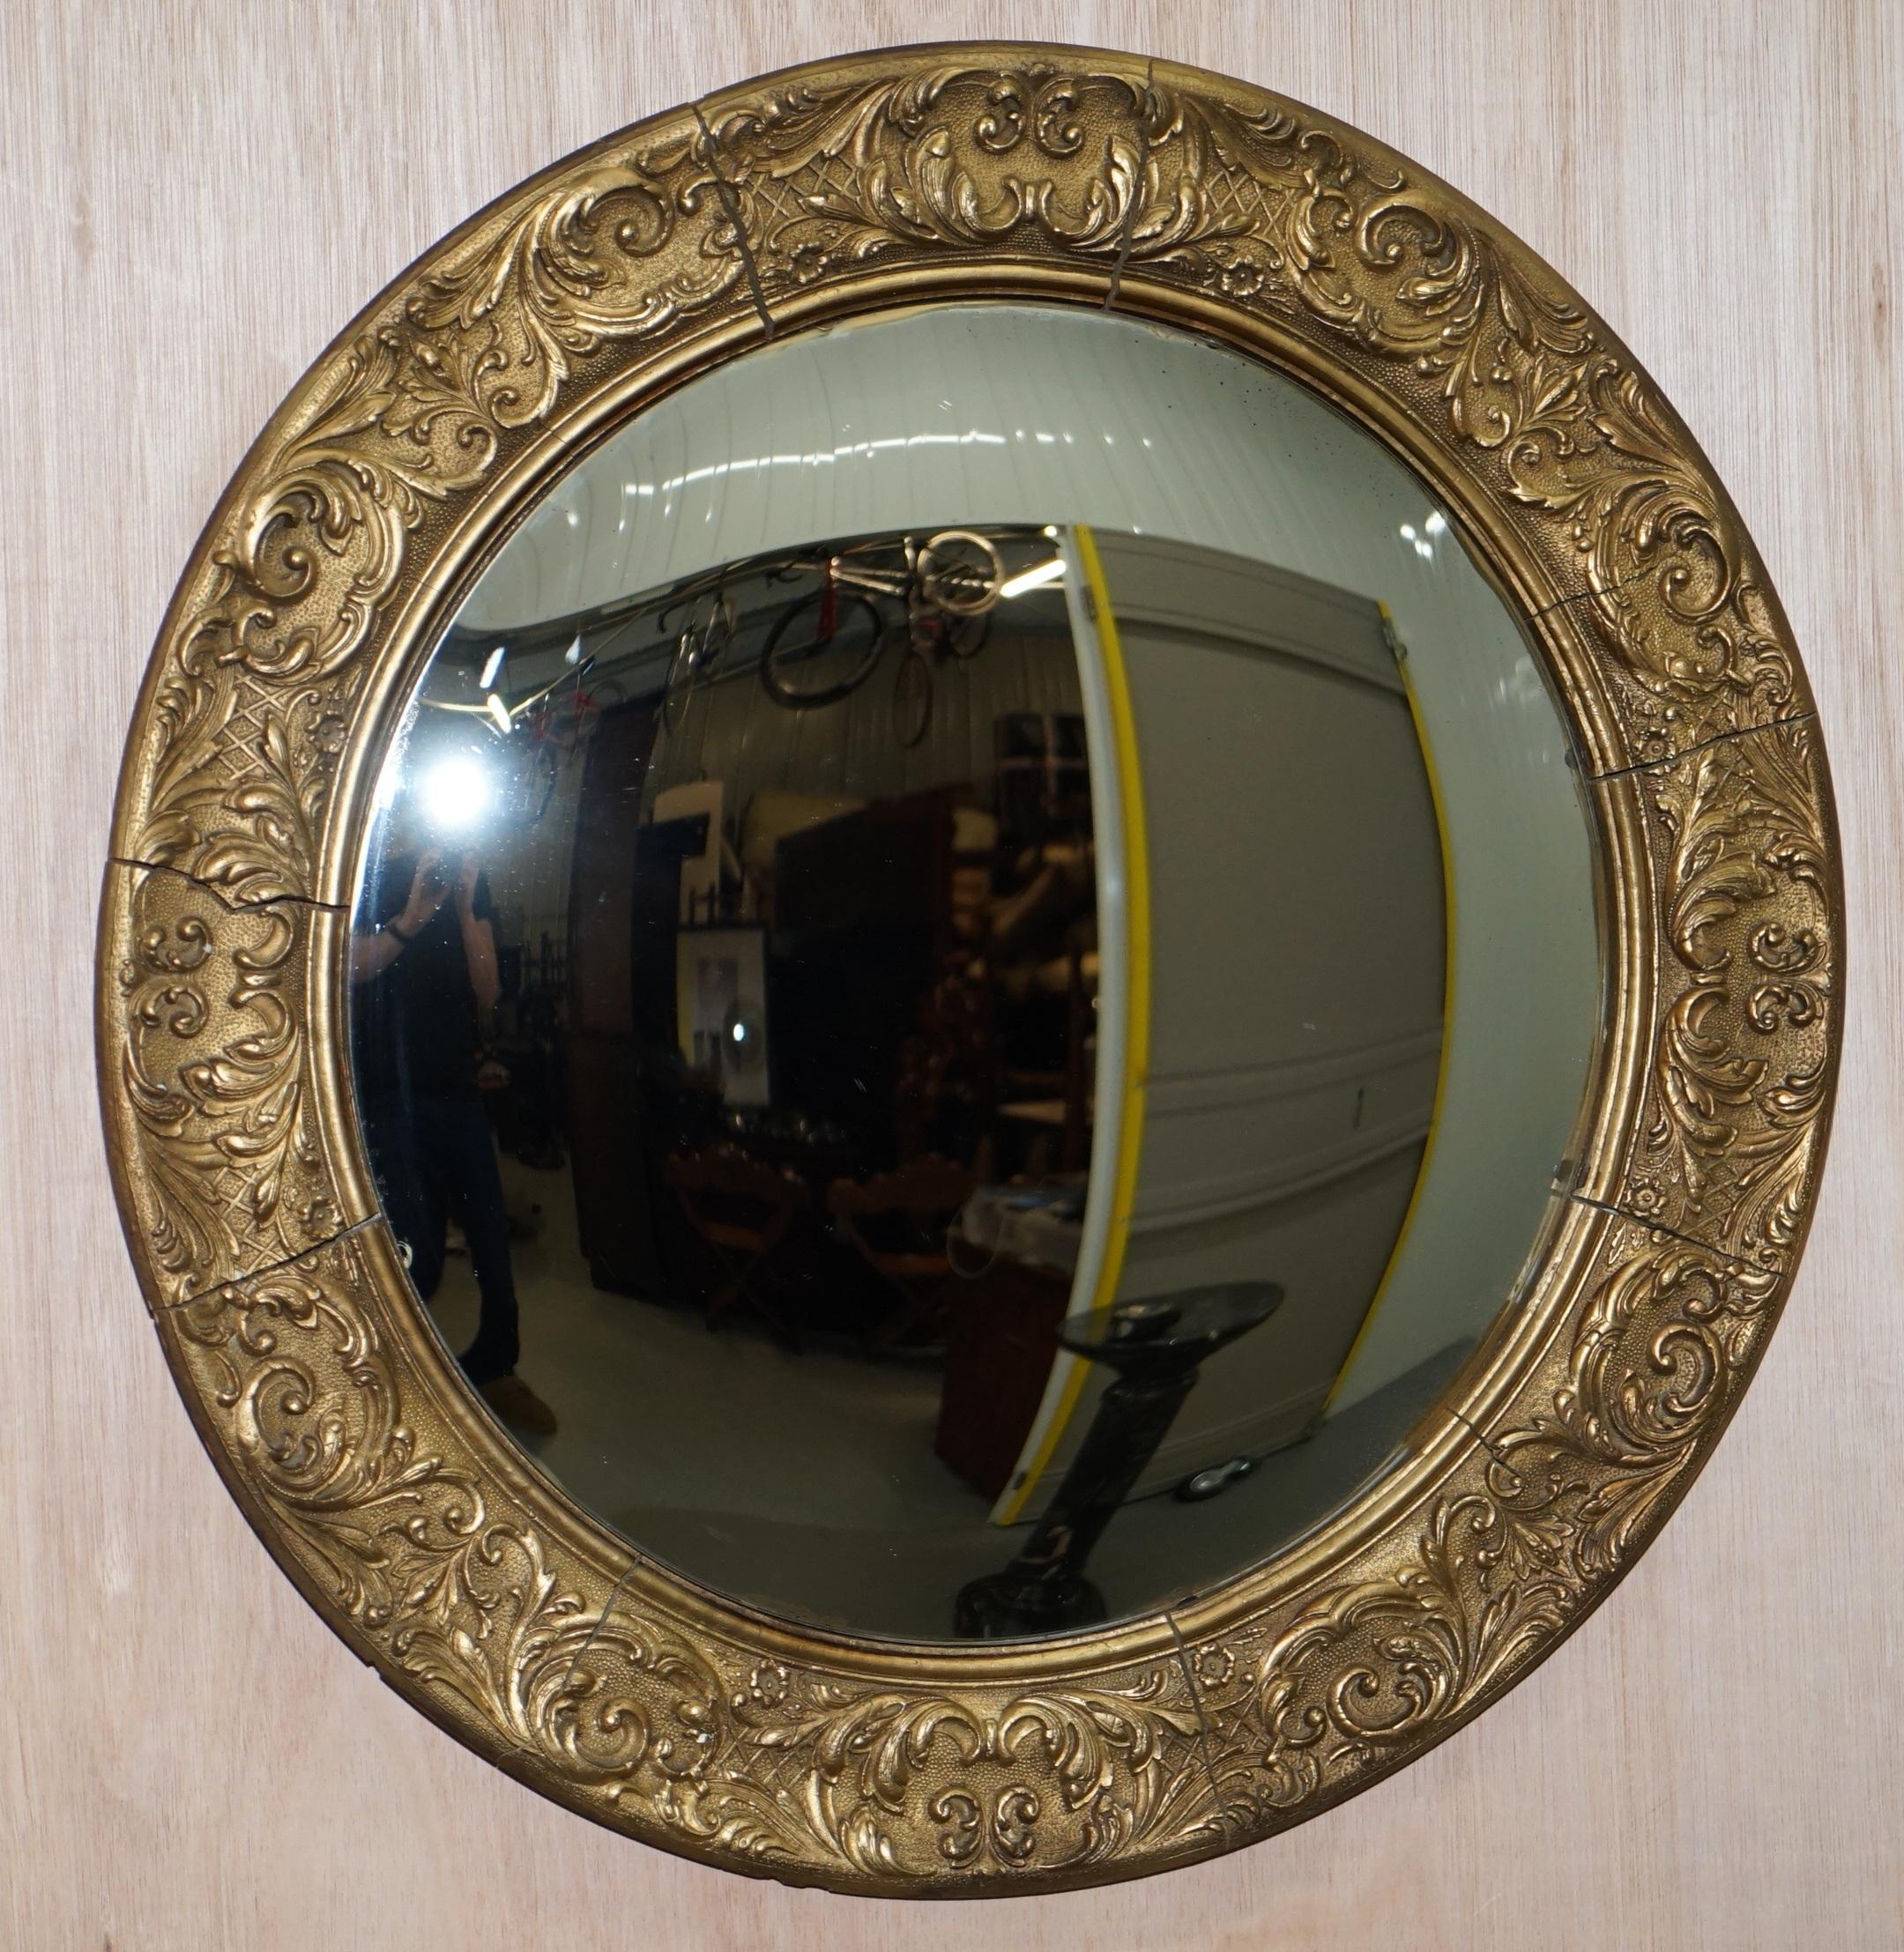 Wimbledon-Furniture

Wimbledon-Furniture is delighted to offer for sale this very nice French Gilt wood convex mirror made in the Regency nautical style

Please note the delivery fee listed is just a guide, it covers within the M25 only, for an